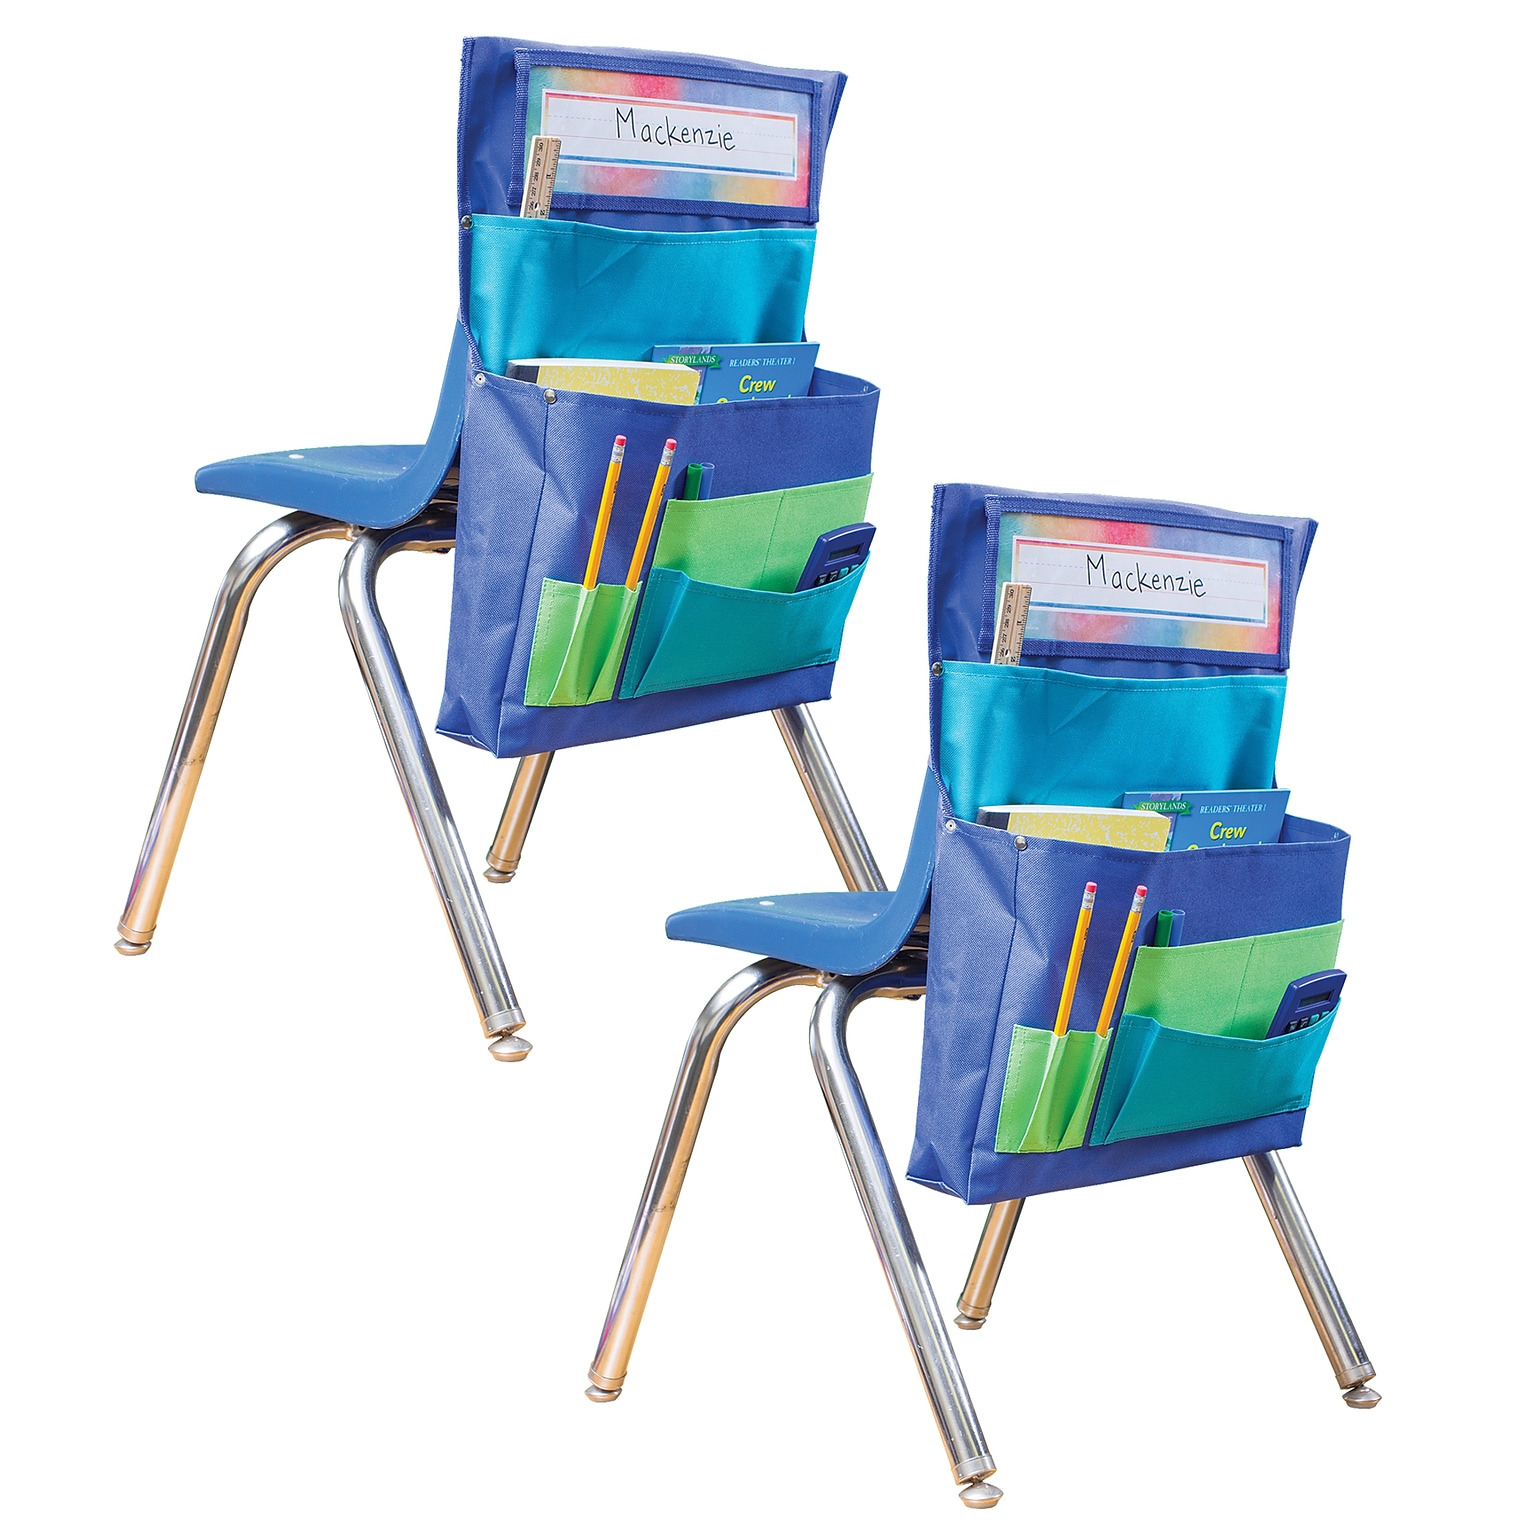 Teacher Created Resources Canvas Chair Pocket, 15.5 x 18, Blue, Teal & Lime, Pack of 2 (TCR20970-2)